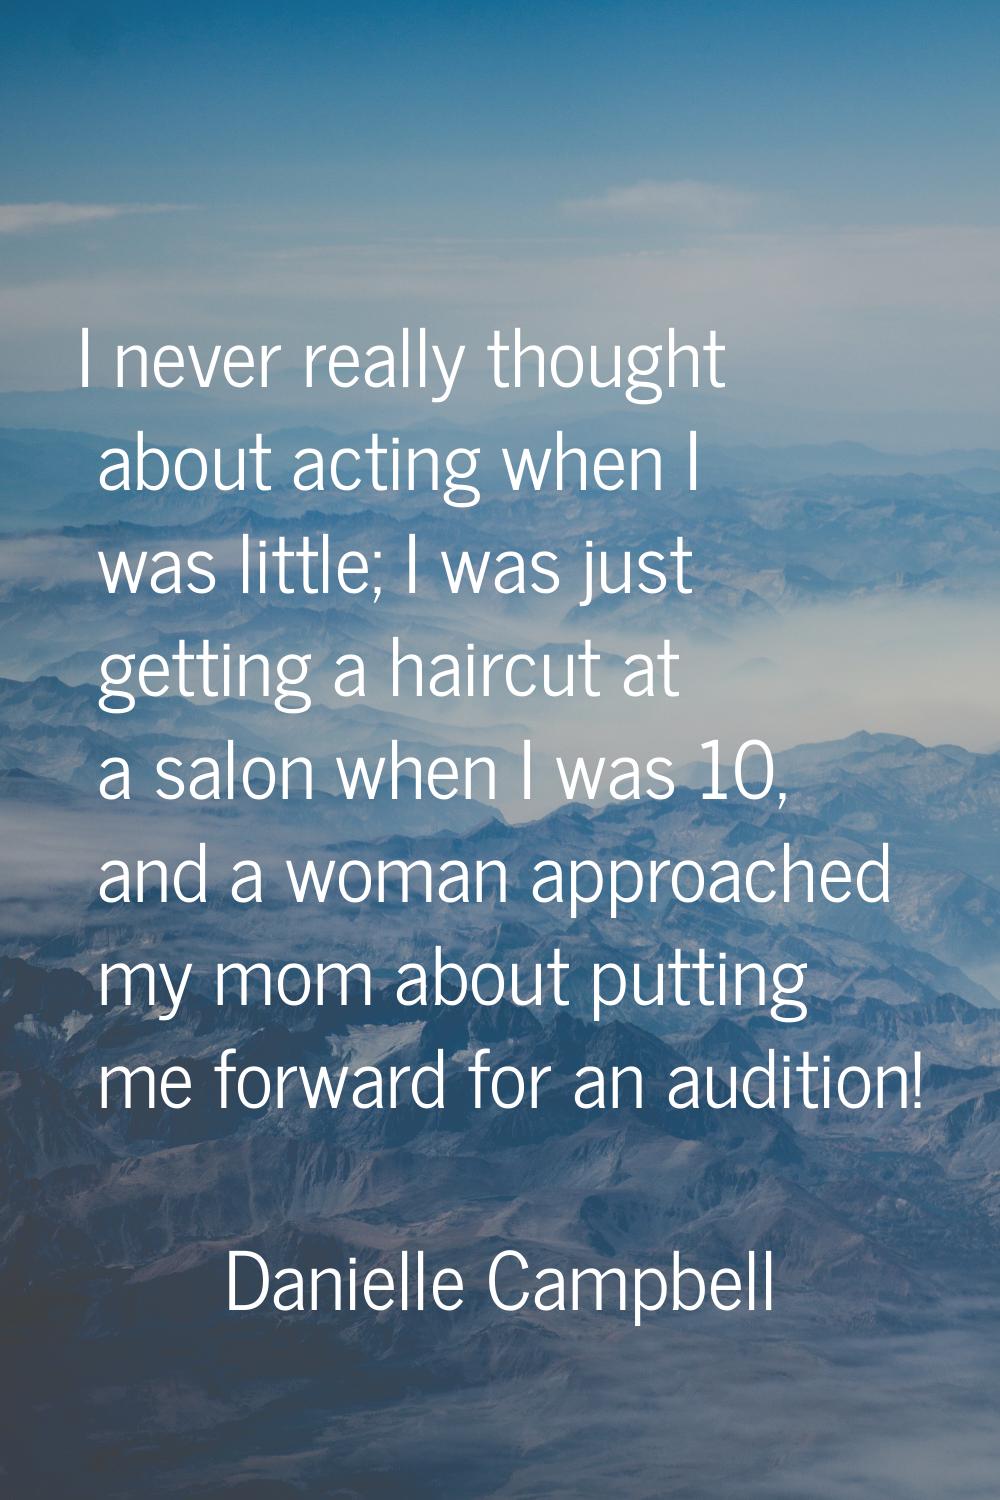 I never really thought about acting when I was little; I was just getting a haircut at a salon when